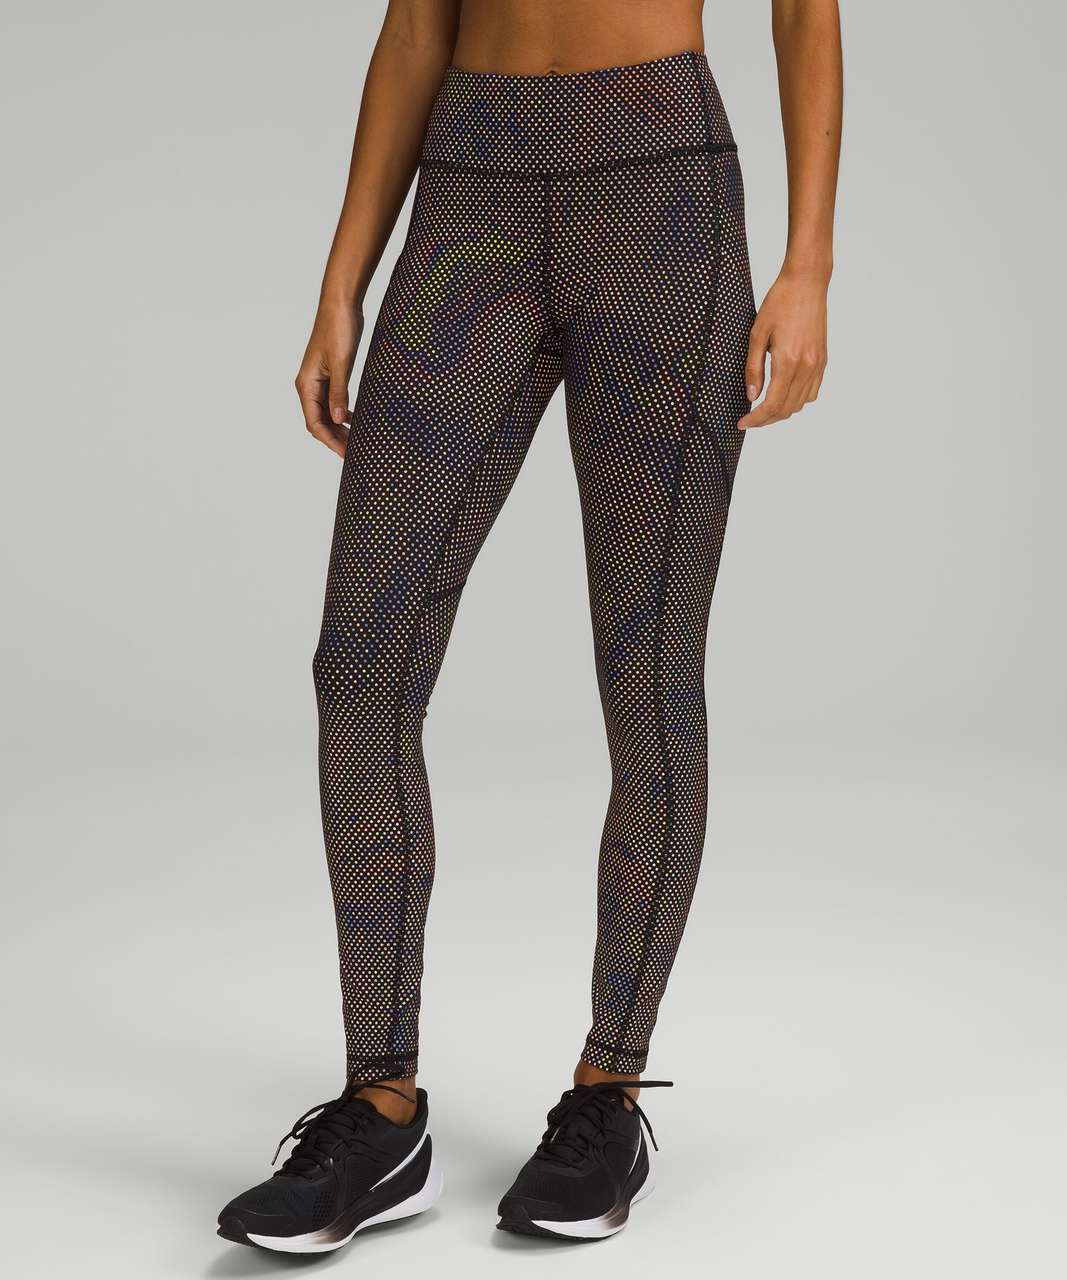 Lululemon Limited Edition Swift Speed Mid-Rise Reflective Tight 28" - Anticipation Reflective Silver Multi